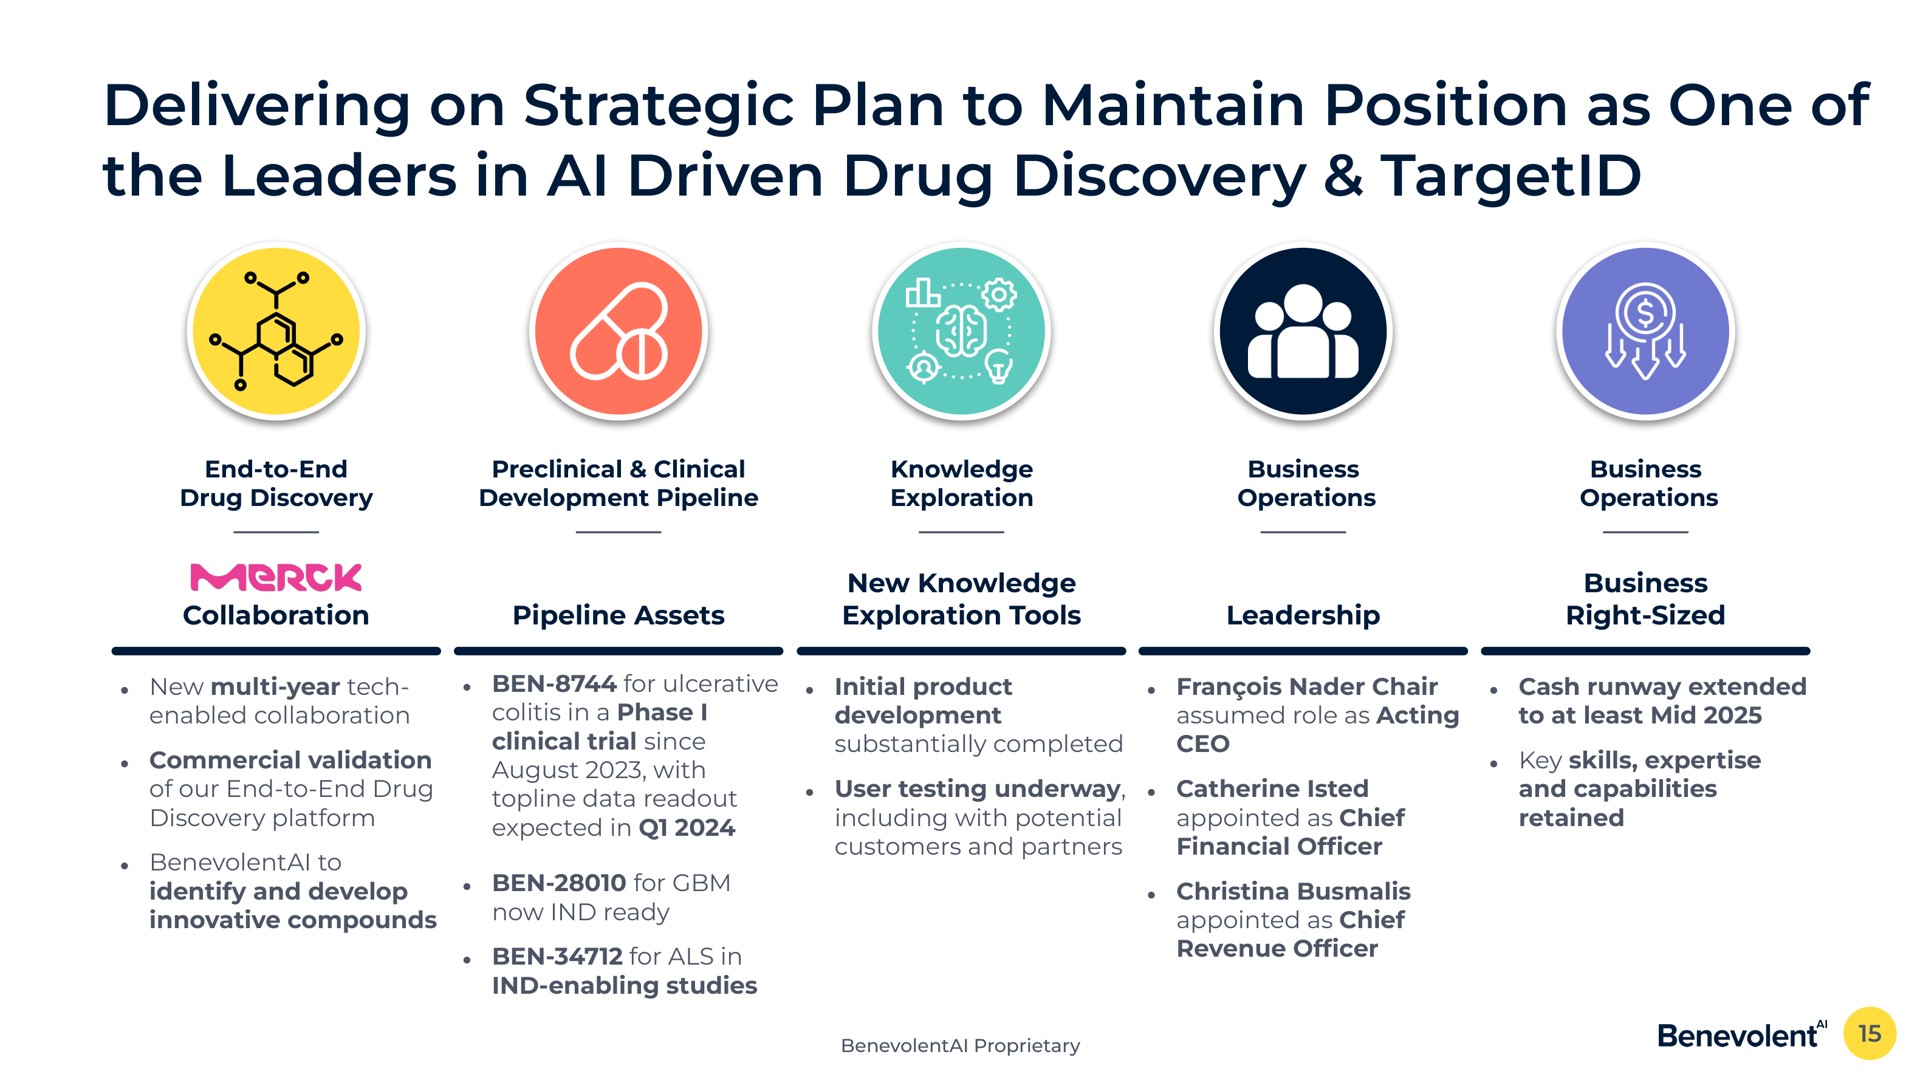 delivering on strategic plan to maintain position as one of the leaders in driven drug discovery | BenevolentAI